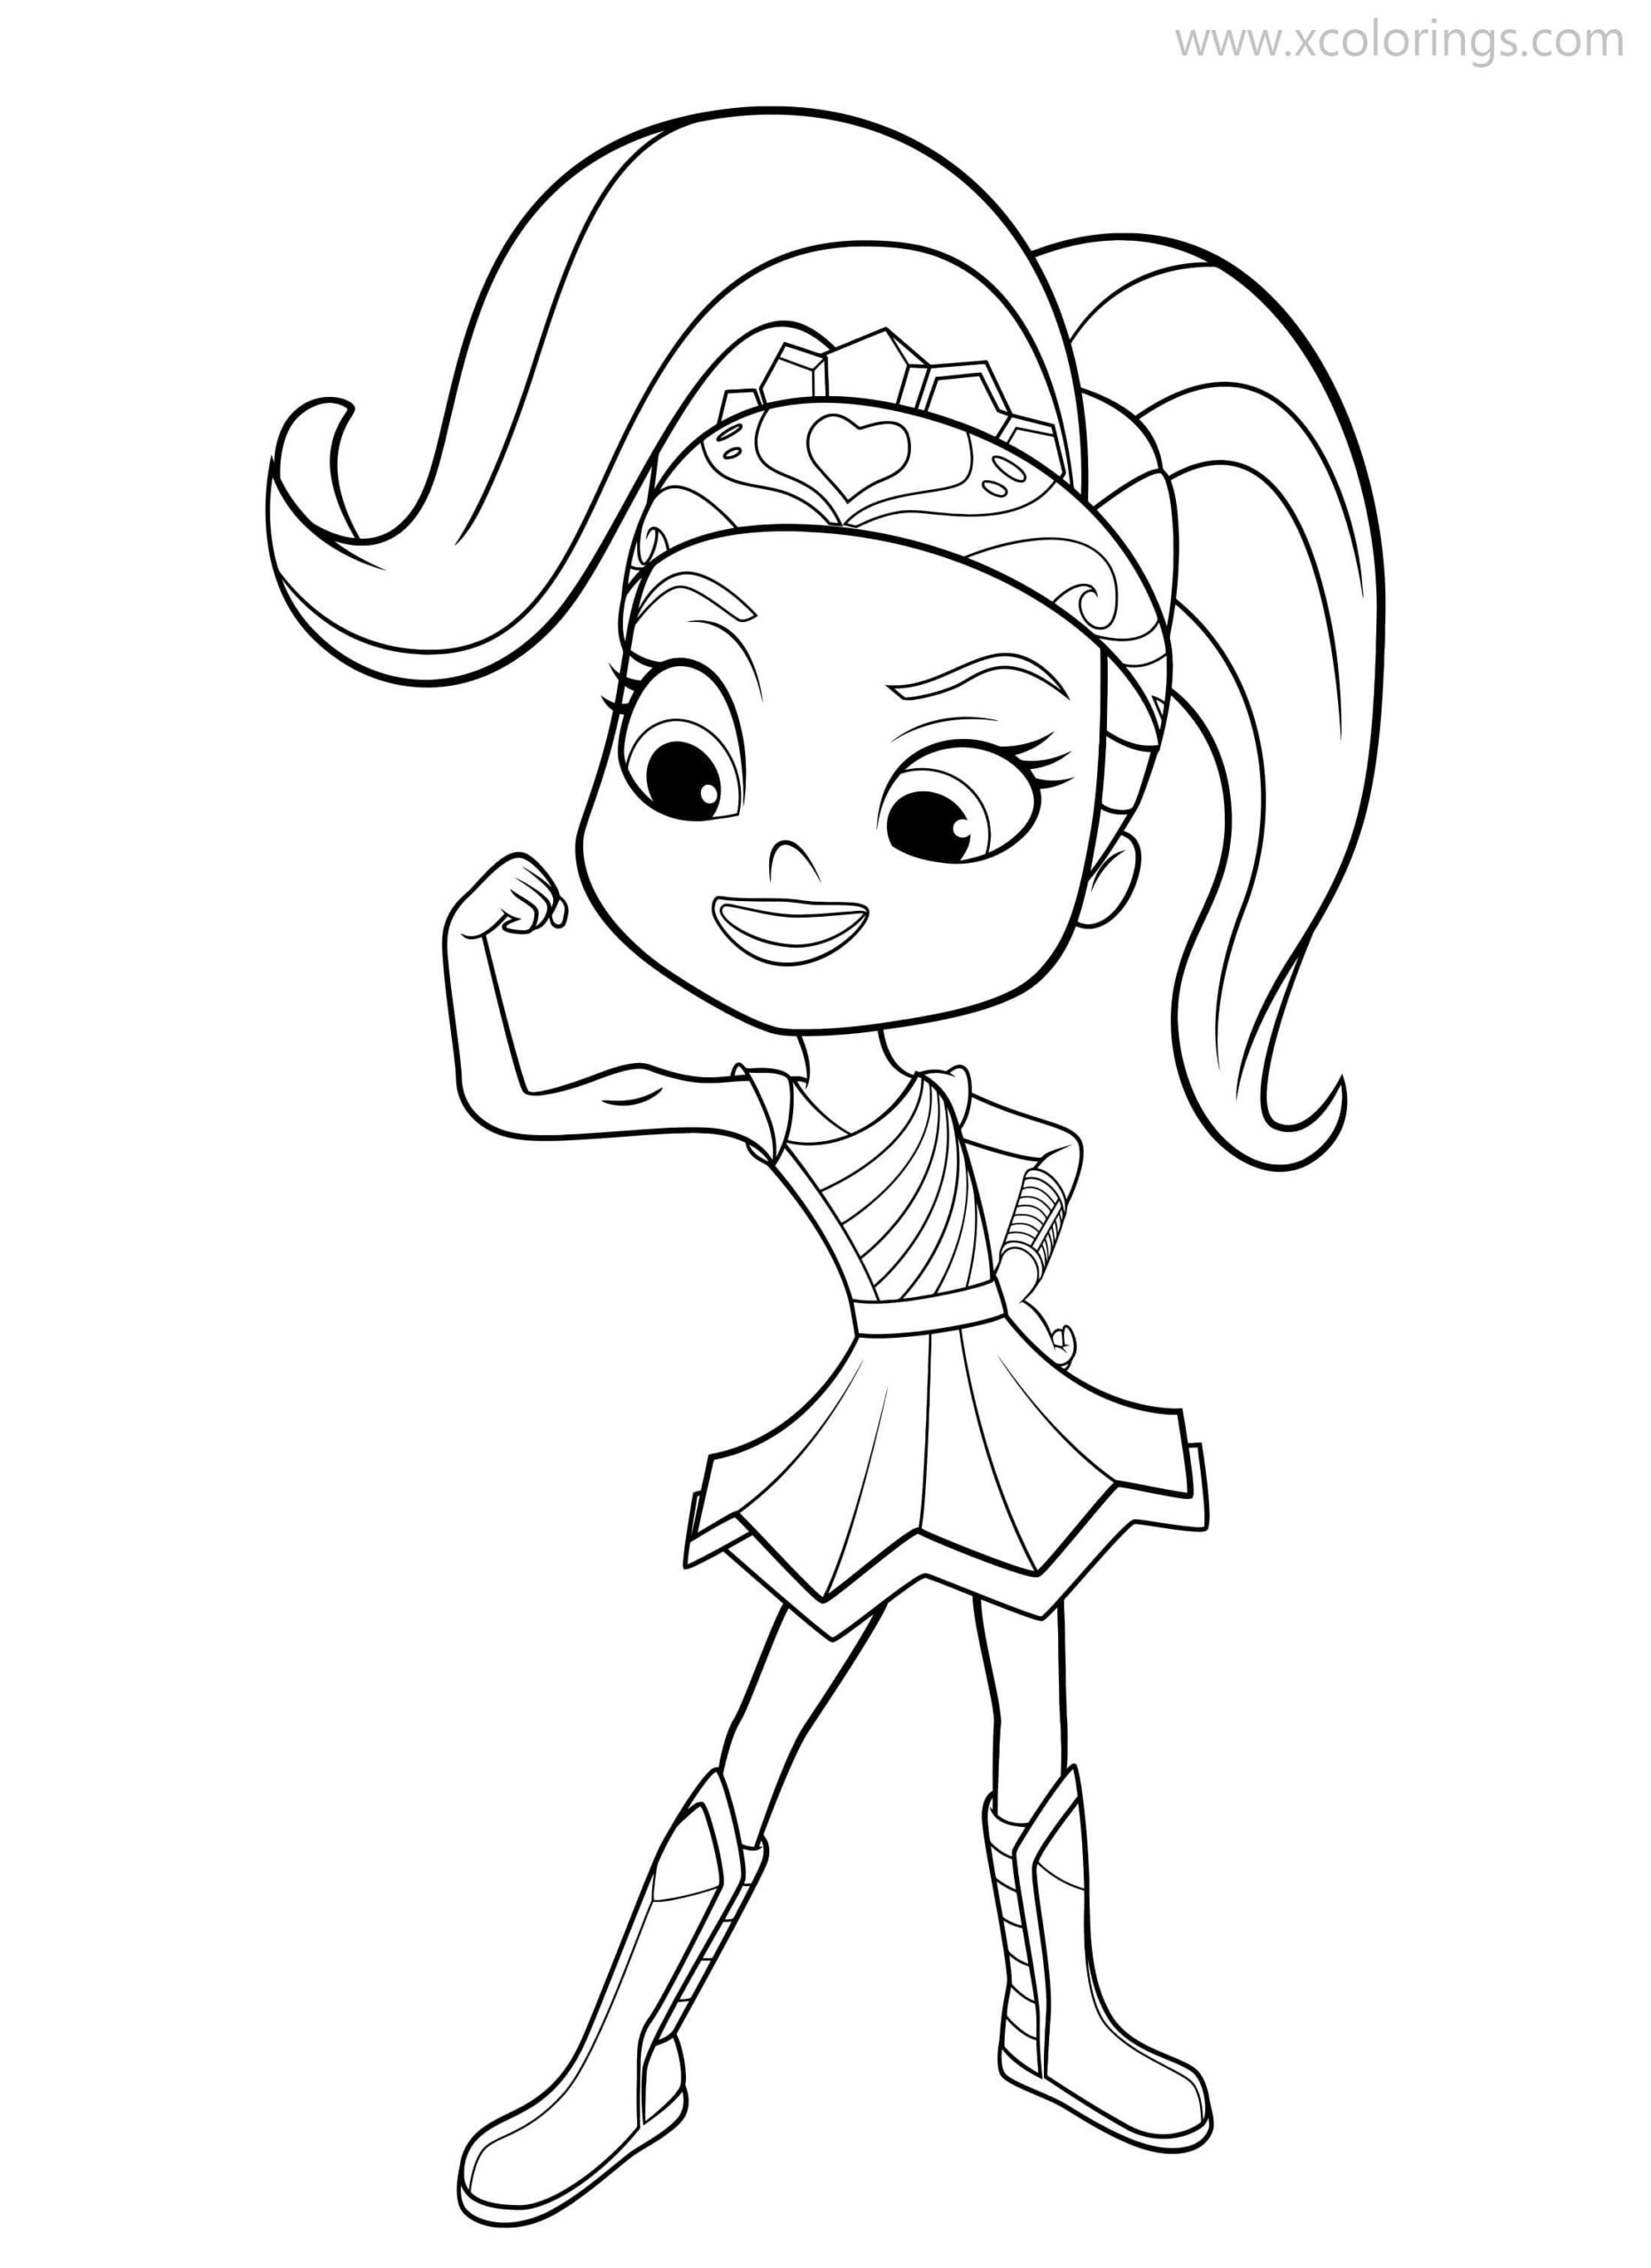 Download Rainbow Rangers Coloring Pages Rosie Redd - XColorings.com